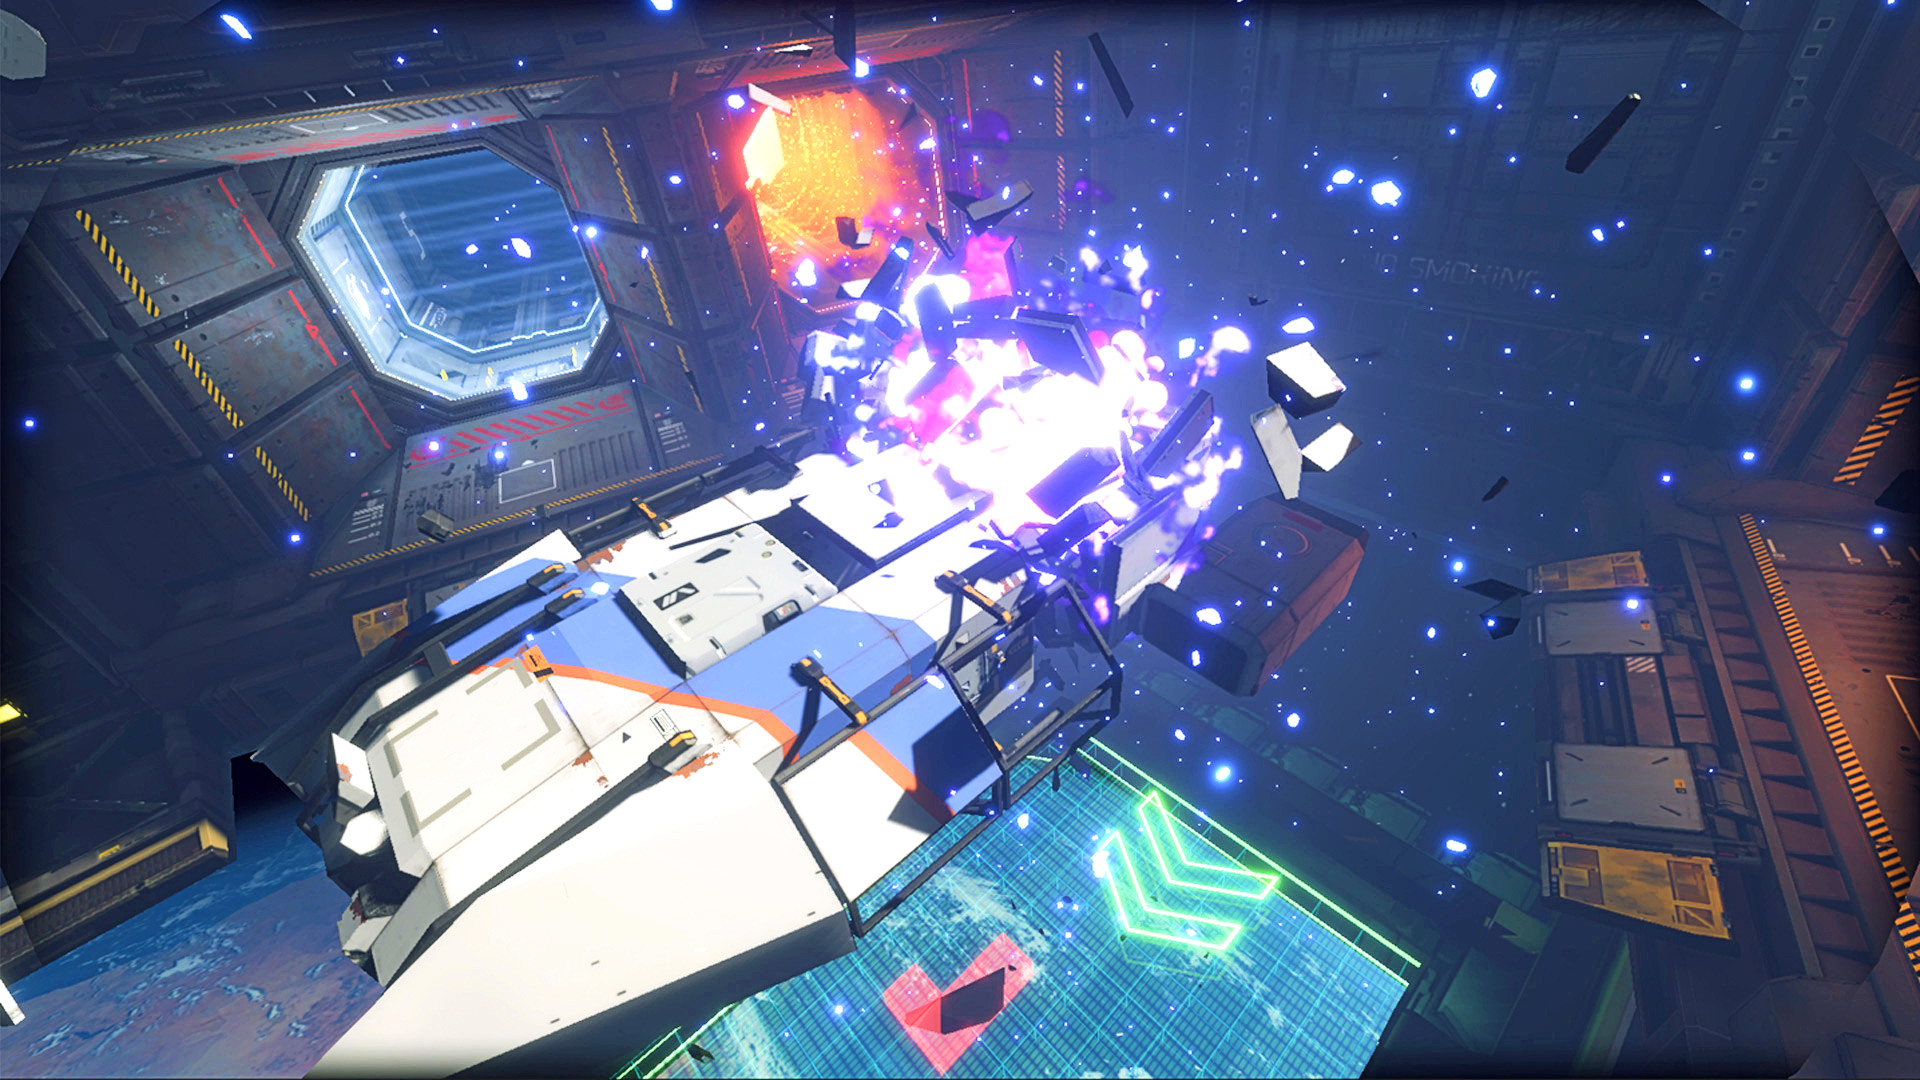 Hardspace: Shipbreaker comes to PC Game Pass next month with v1.0